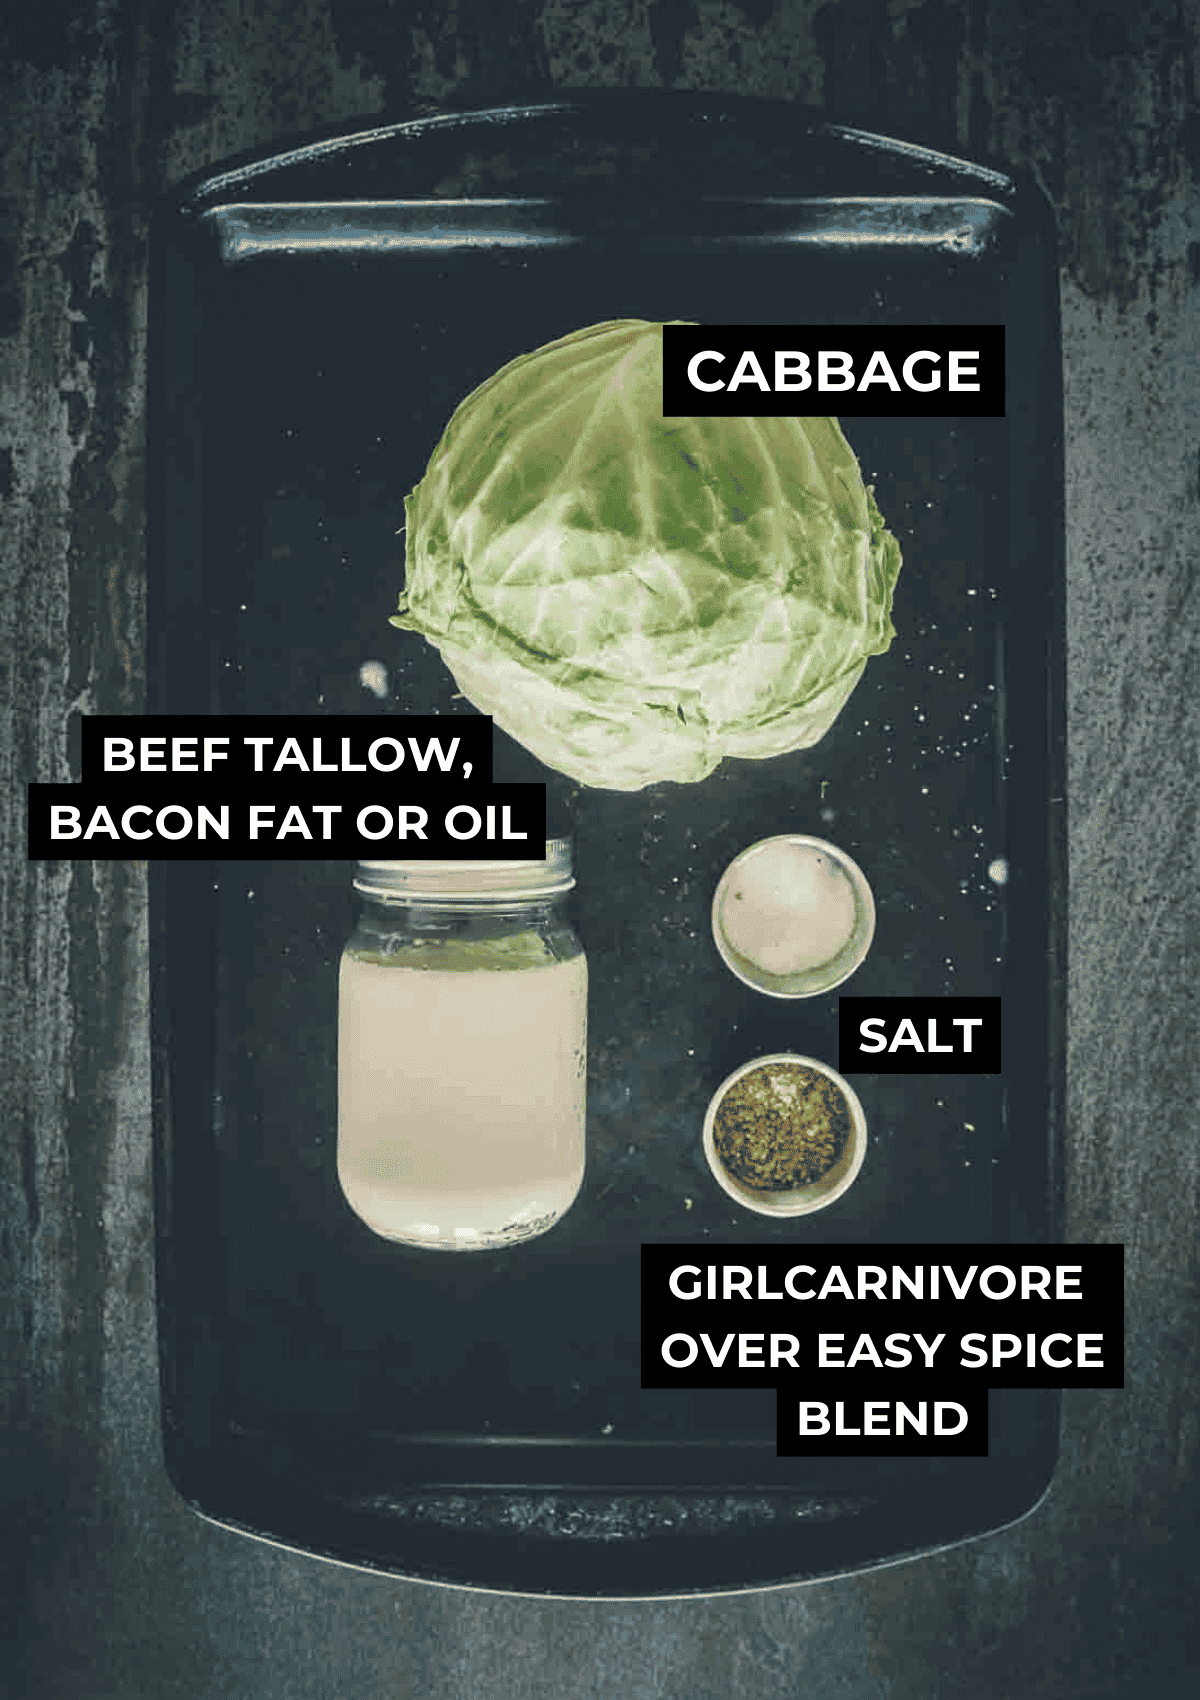 Ingredients for smoked cabbage. 